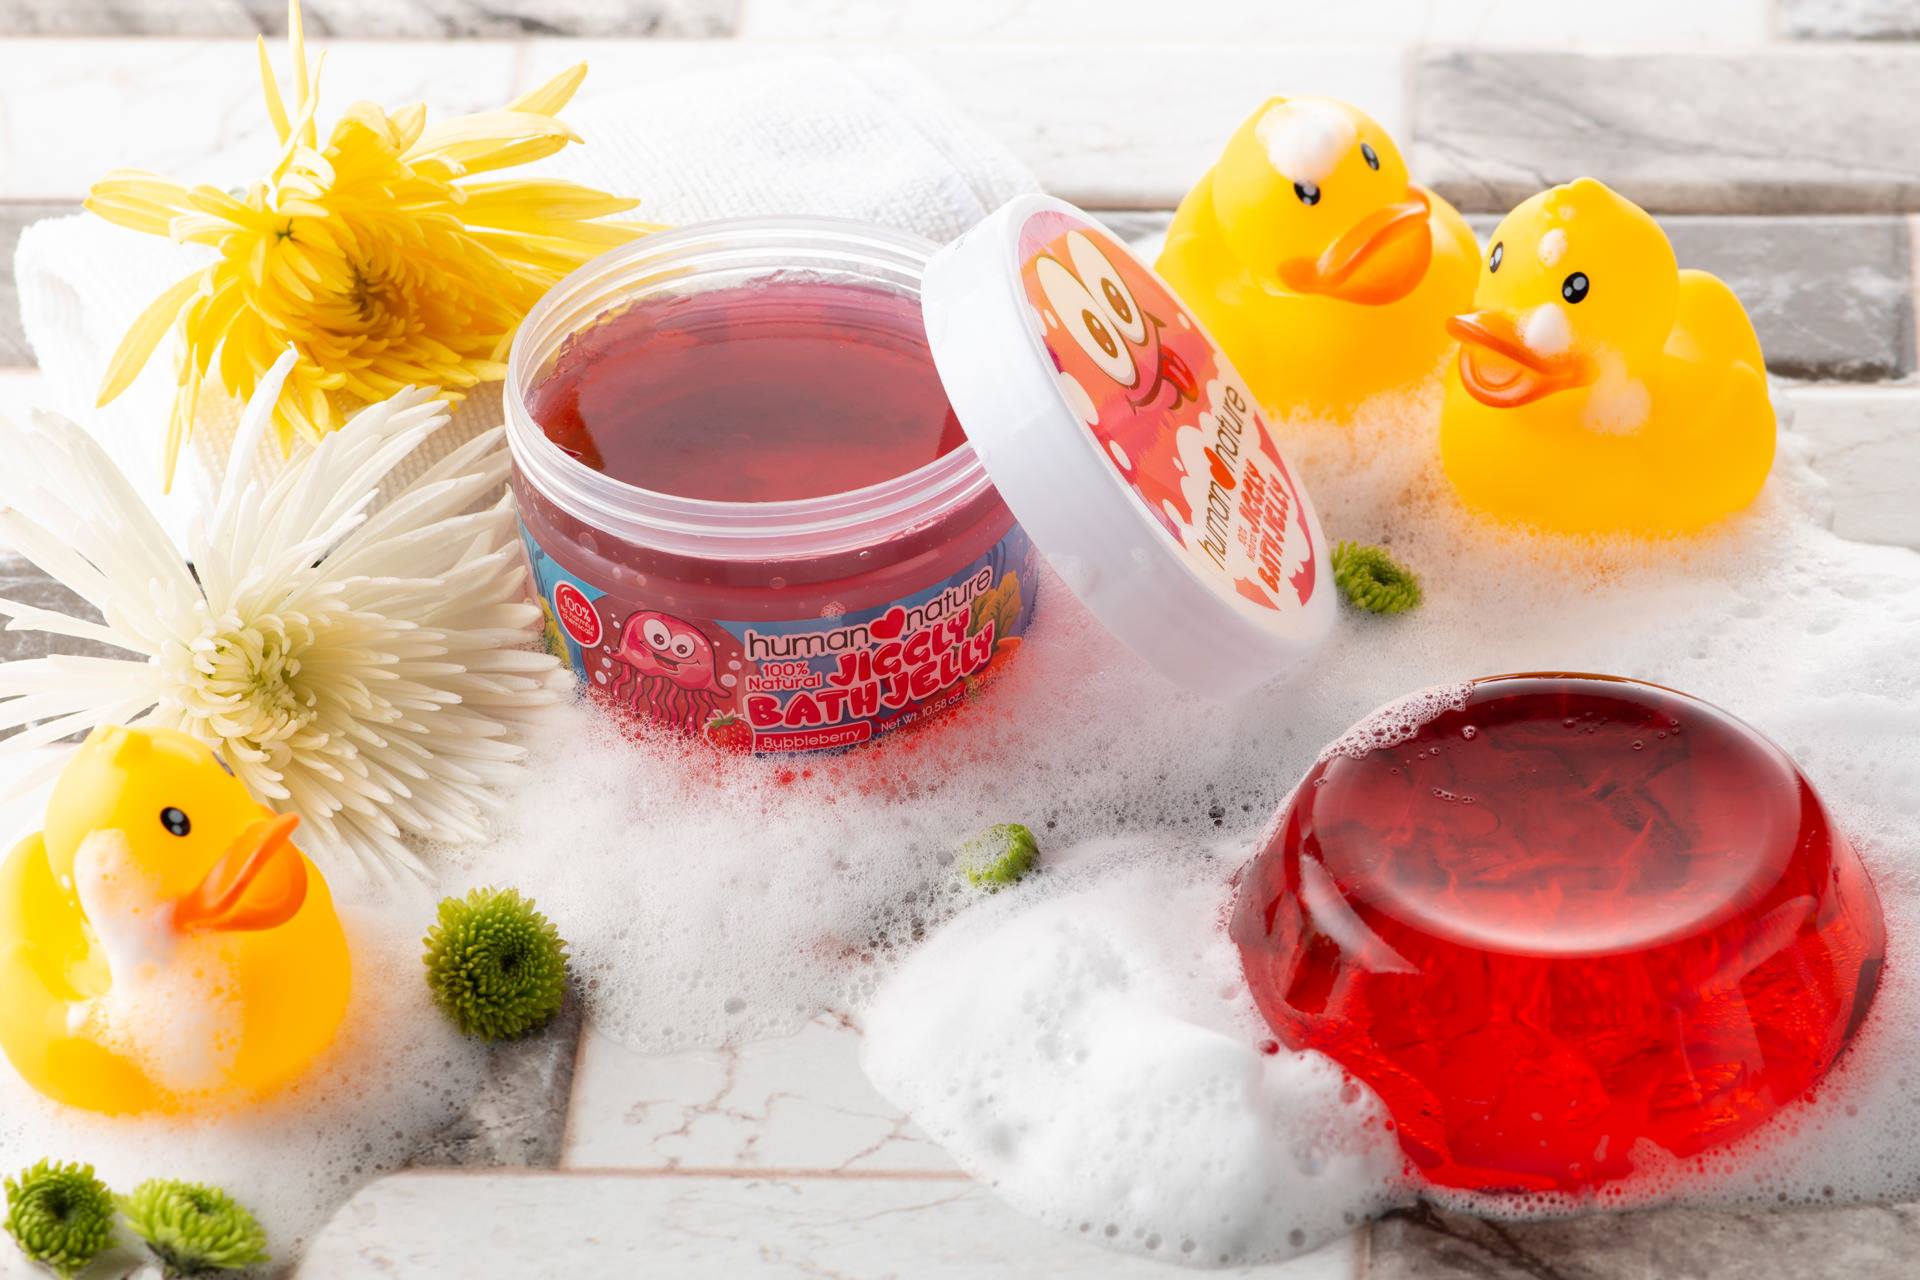 Wash away grime with Human Nature Jiggly Bath Jelly